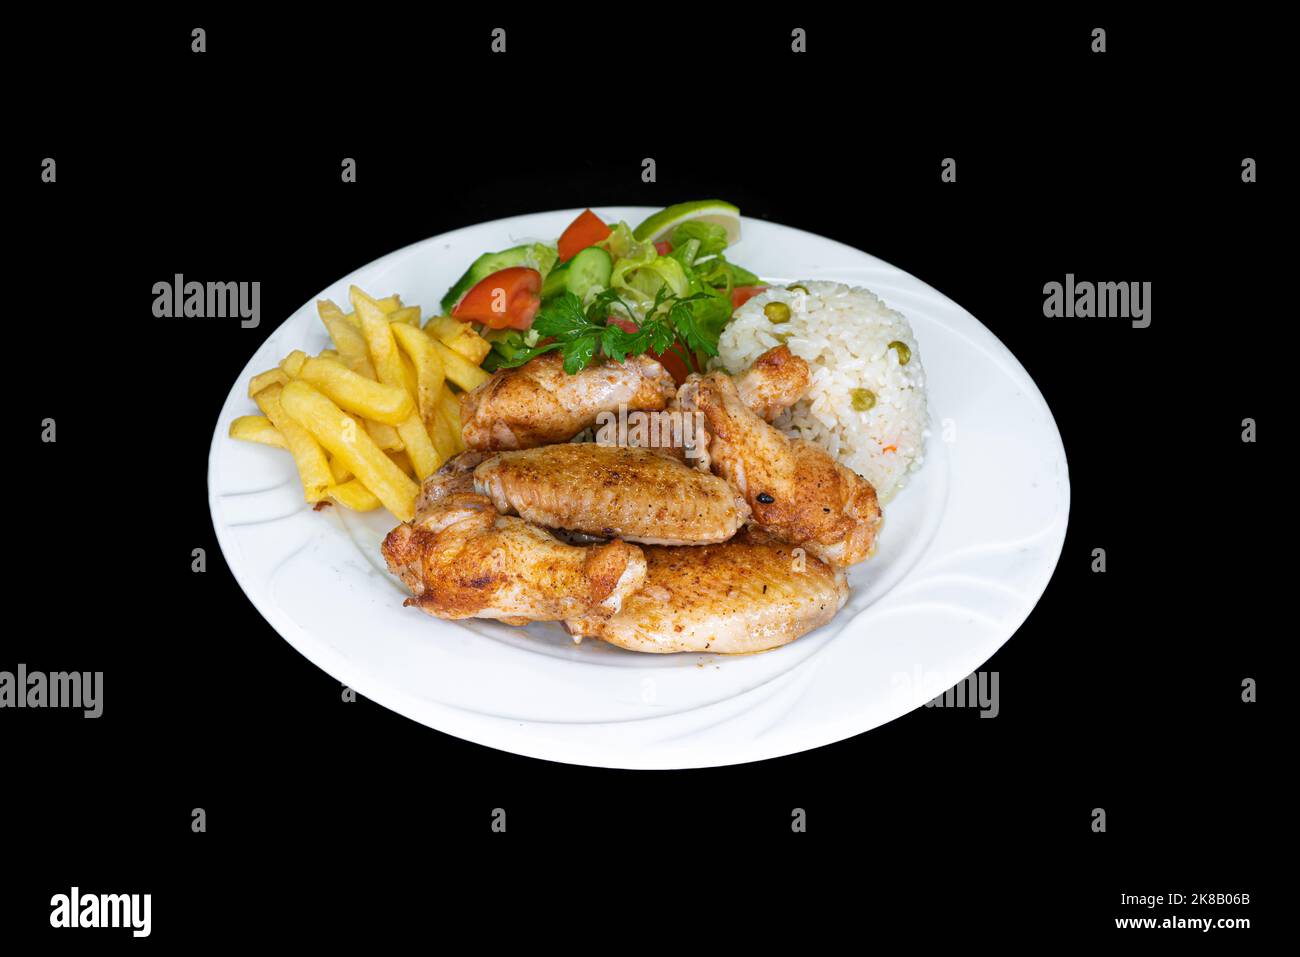 Grilled chicken wings with rice, salad and french fries in a white plate on a black background Stock Photo